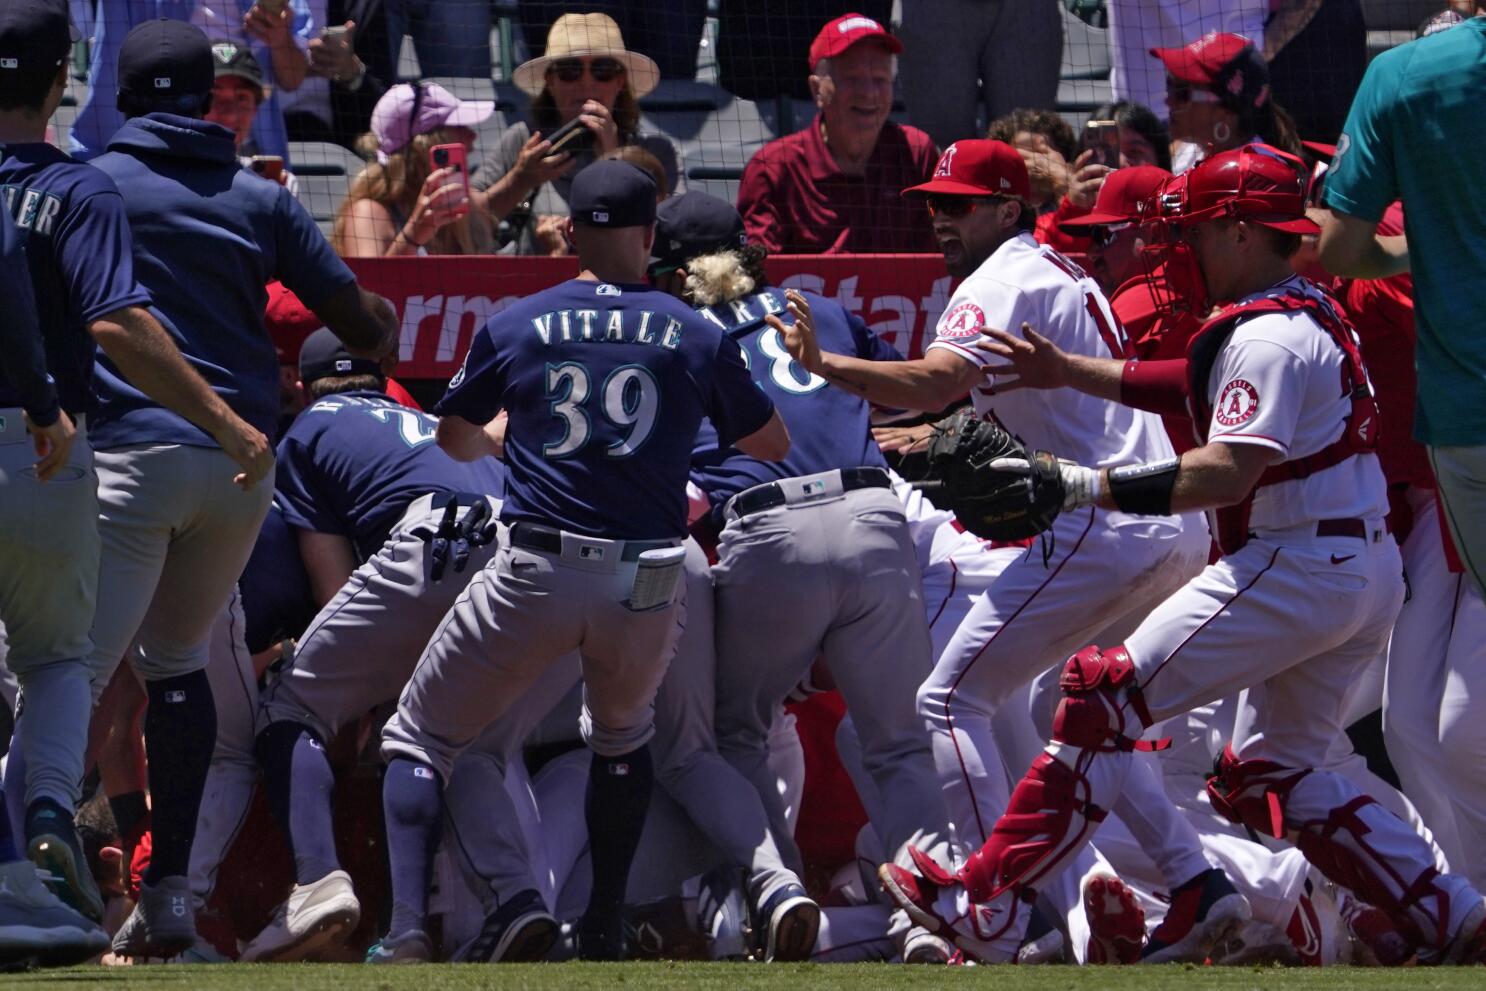 Angels and Mariners Brawl Results in 47 Games of Suspensions - The New York  Times